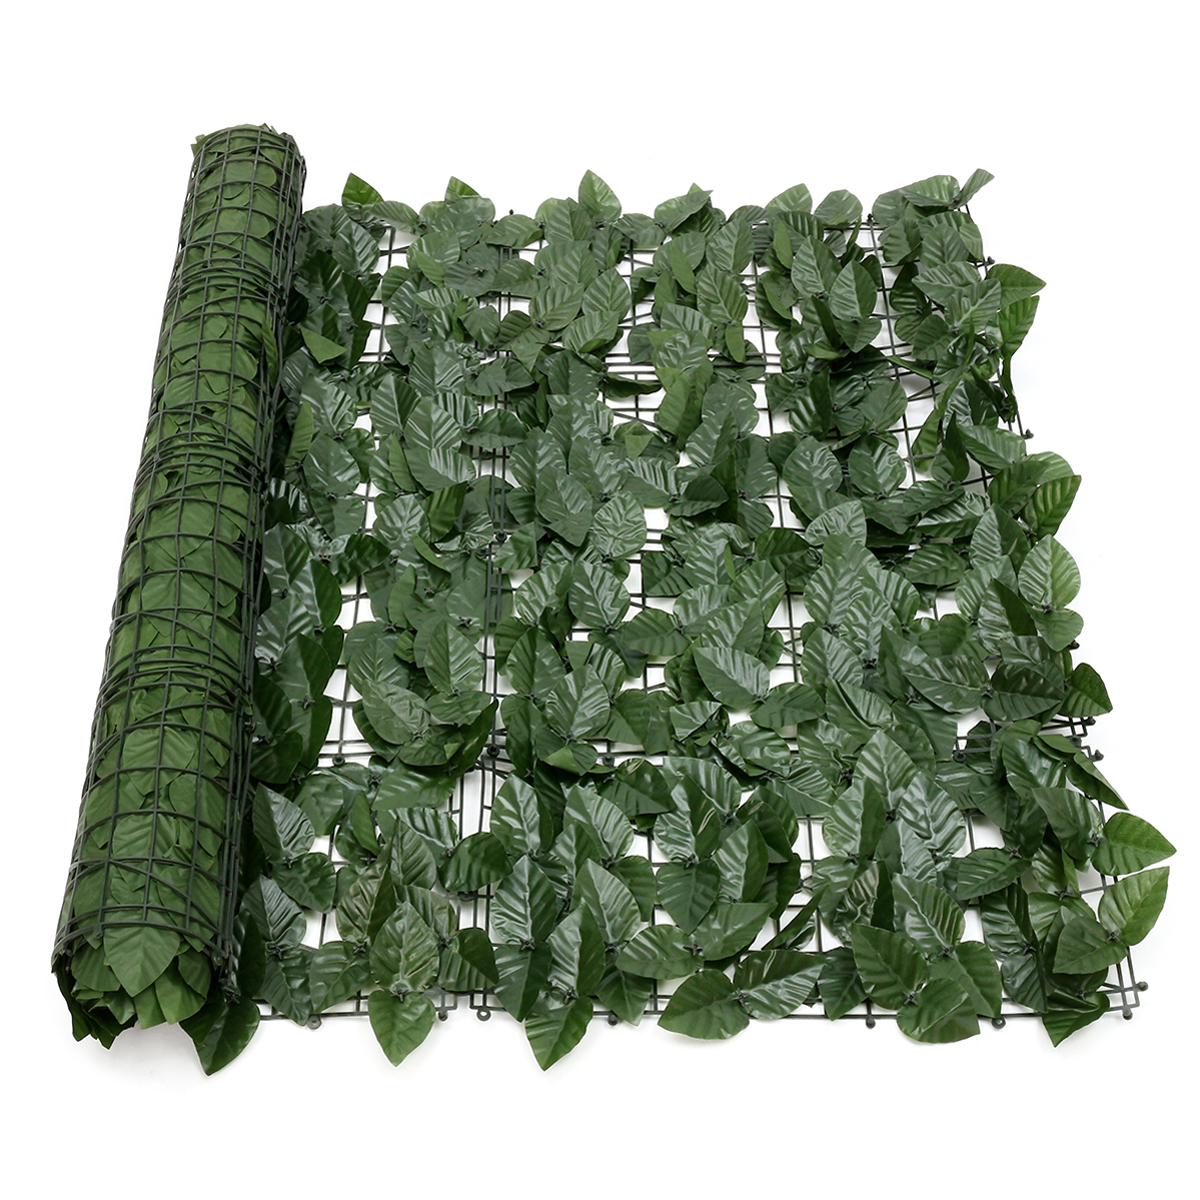 Expanding-13M-Artificial-Lvy-Leaf-Wall-Fence-Green-Garden-Screen-Hedge-Decorations-1474970-9